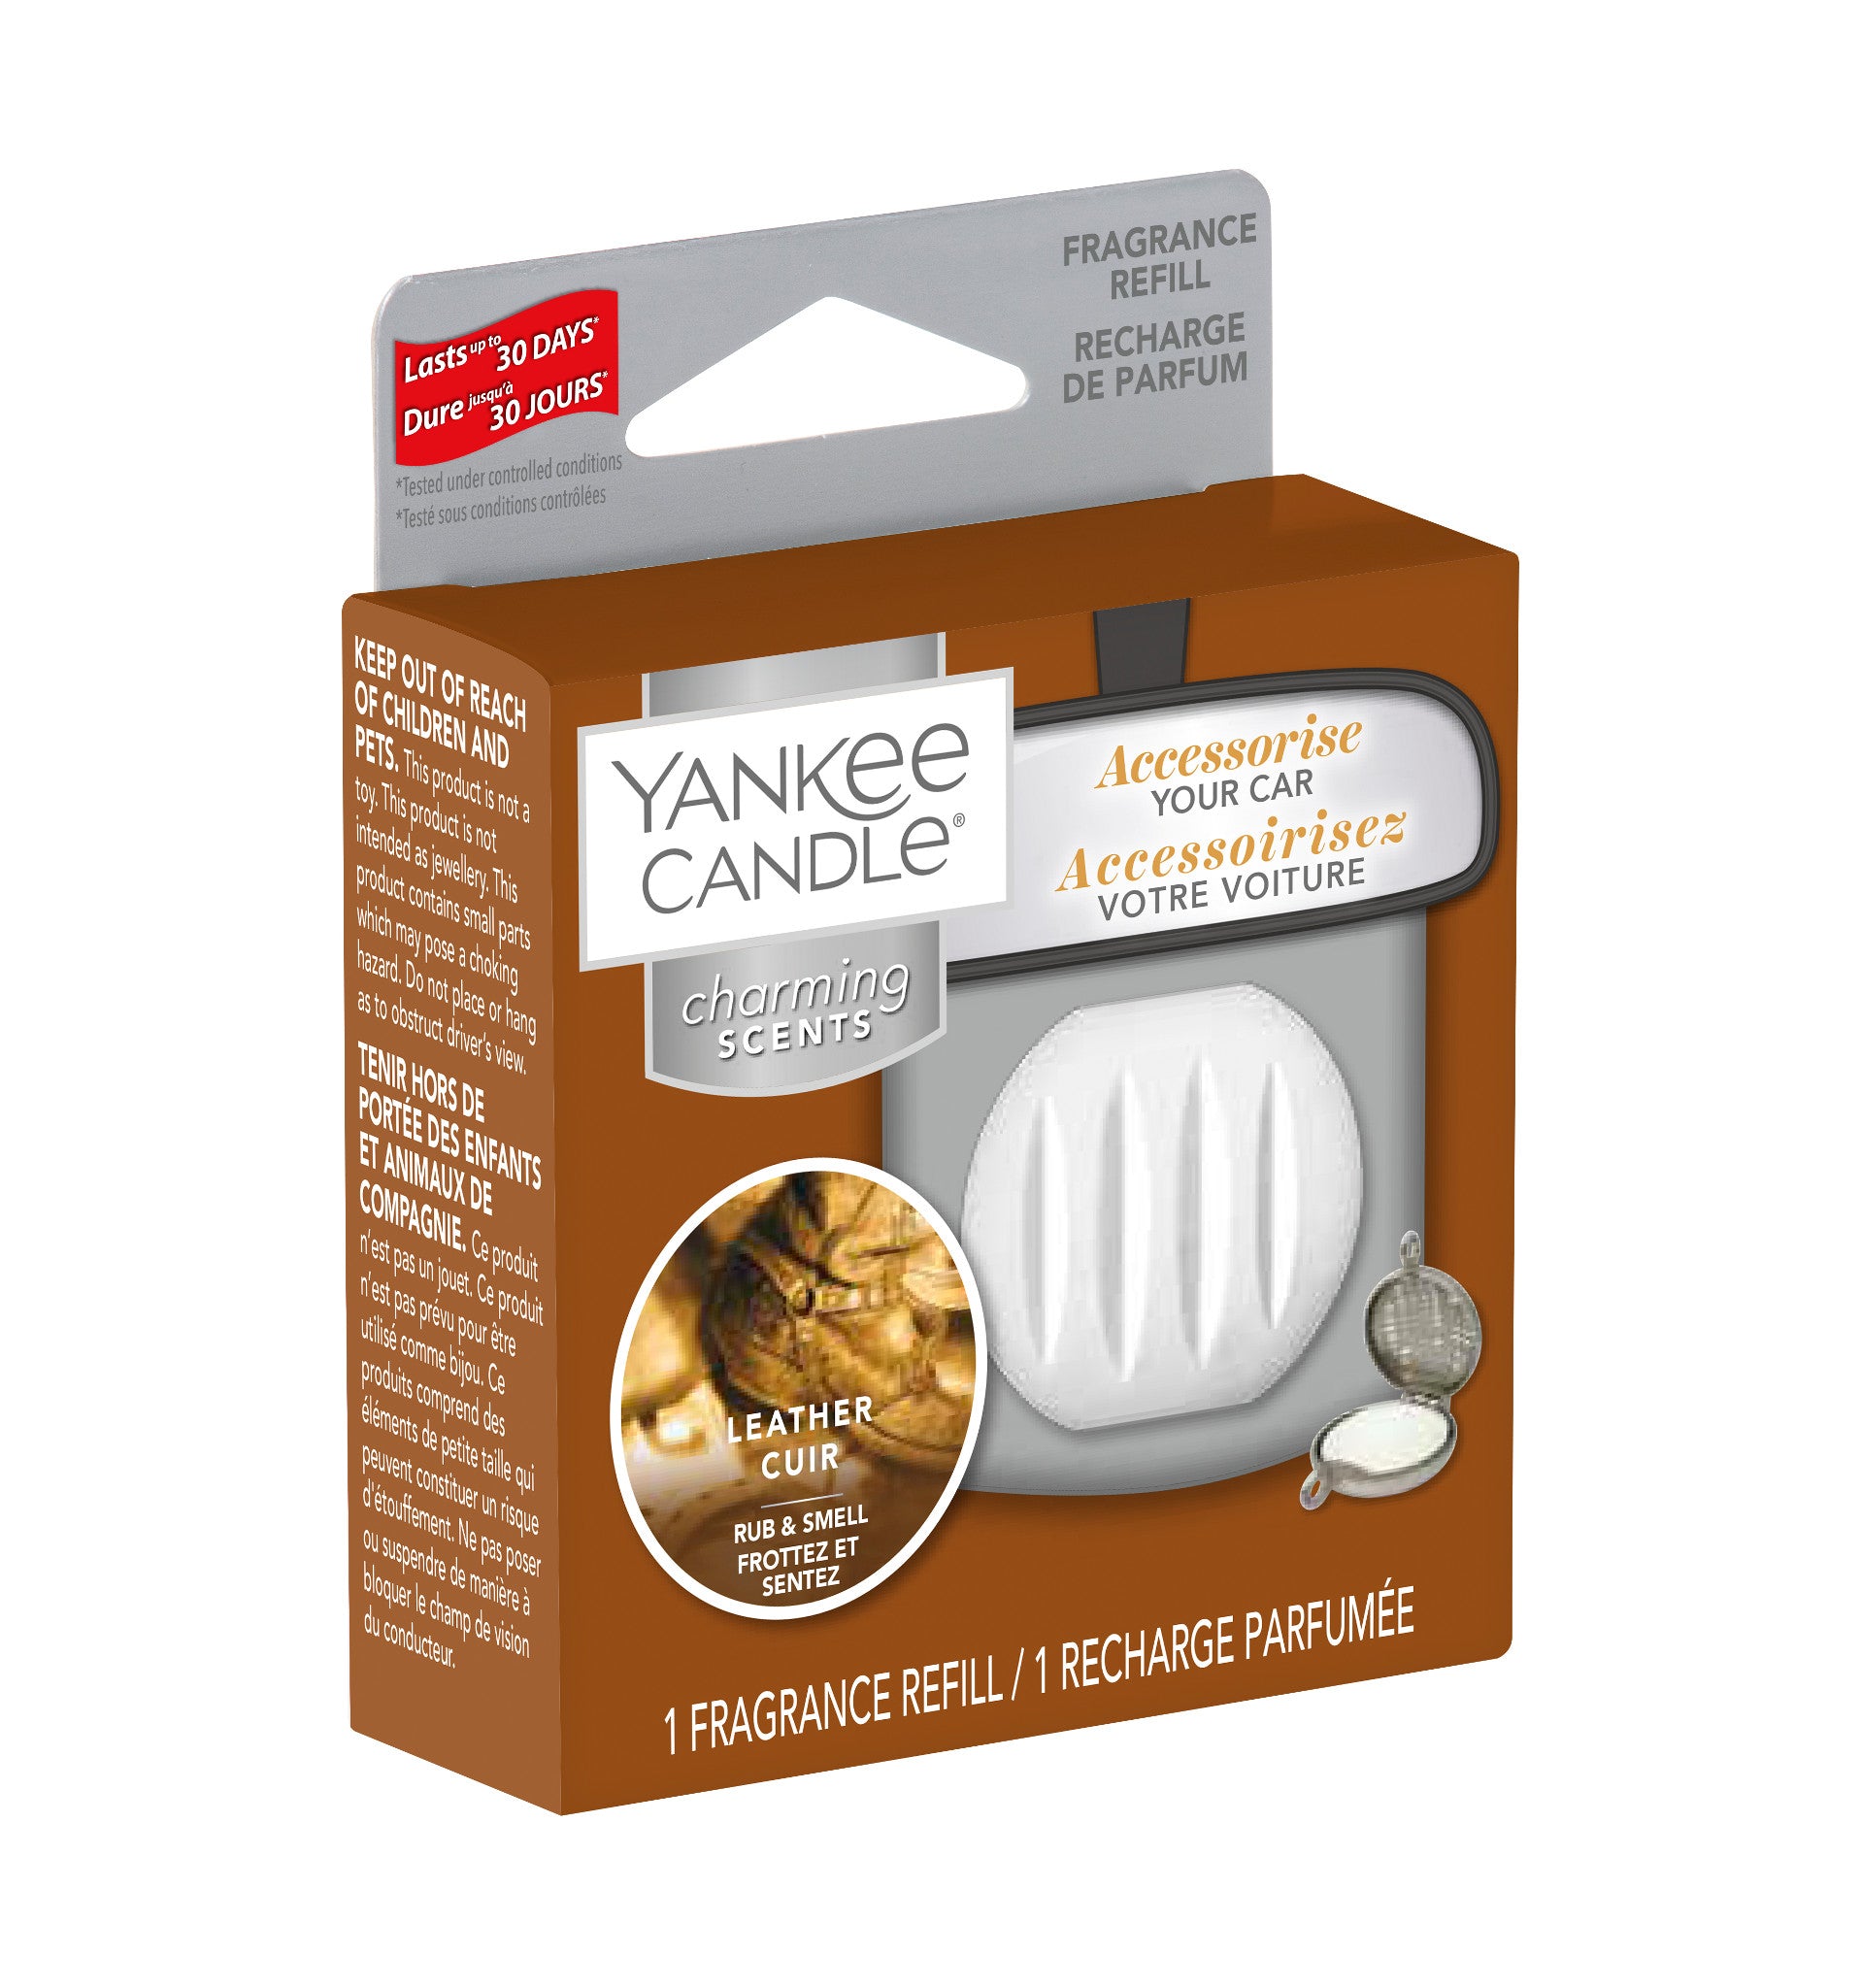 LEATHER -Yankee Candle- Charming Scents Ricarica di Fragranza